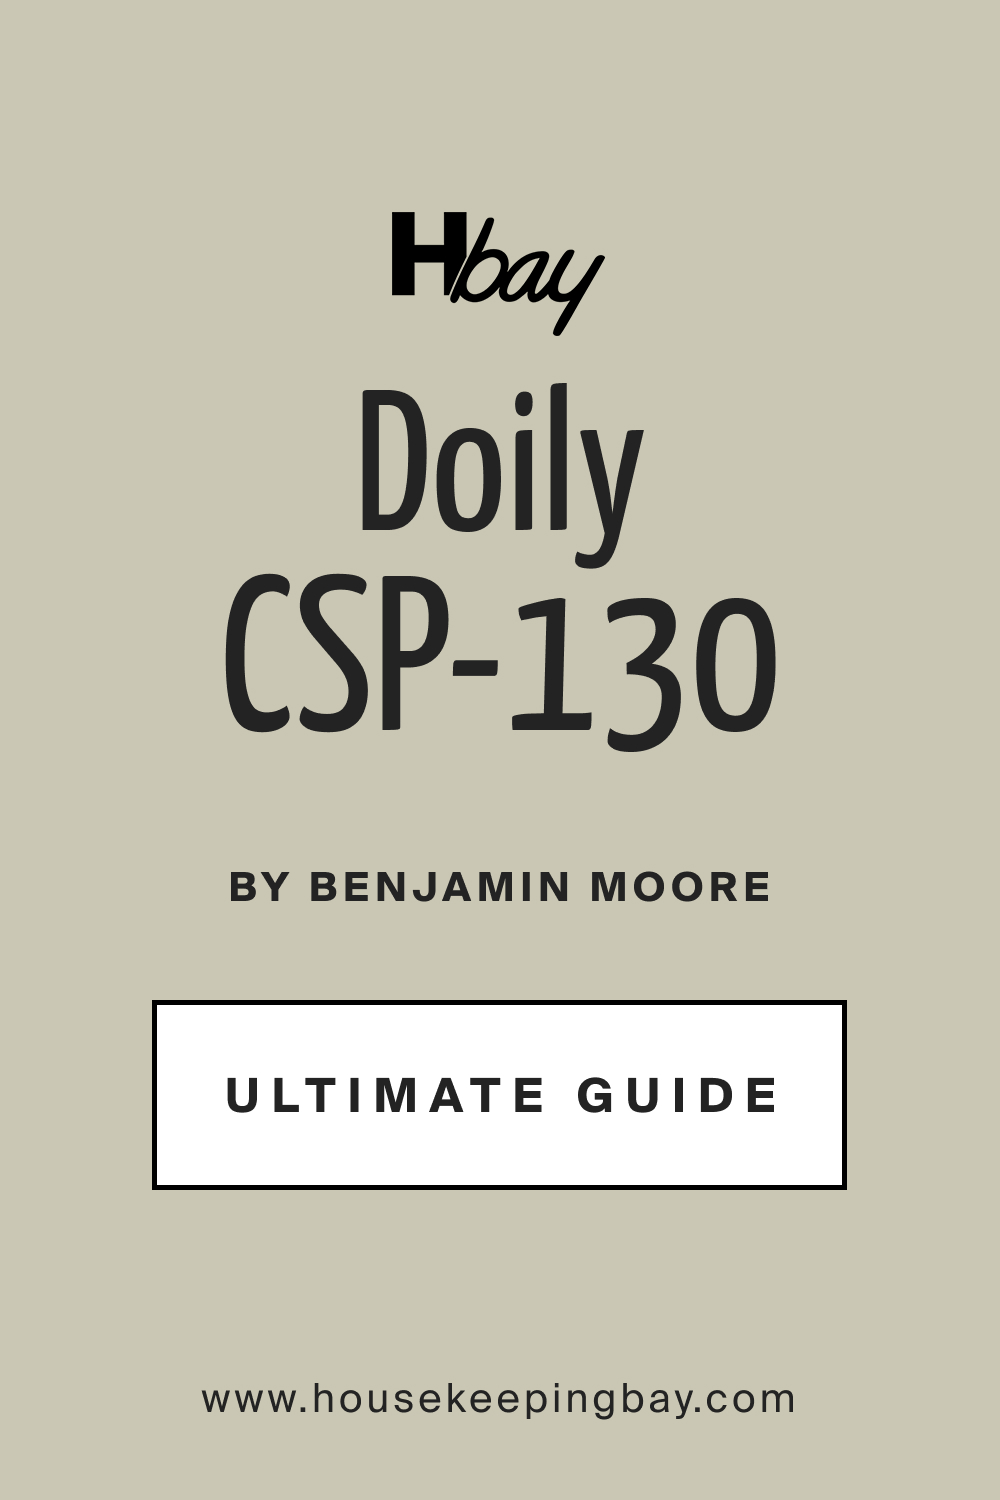 Doily CSP-130 Paint Color by Benjamin Moore